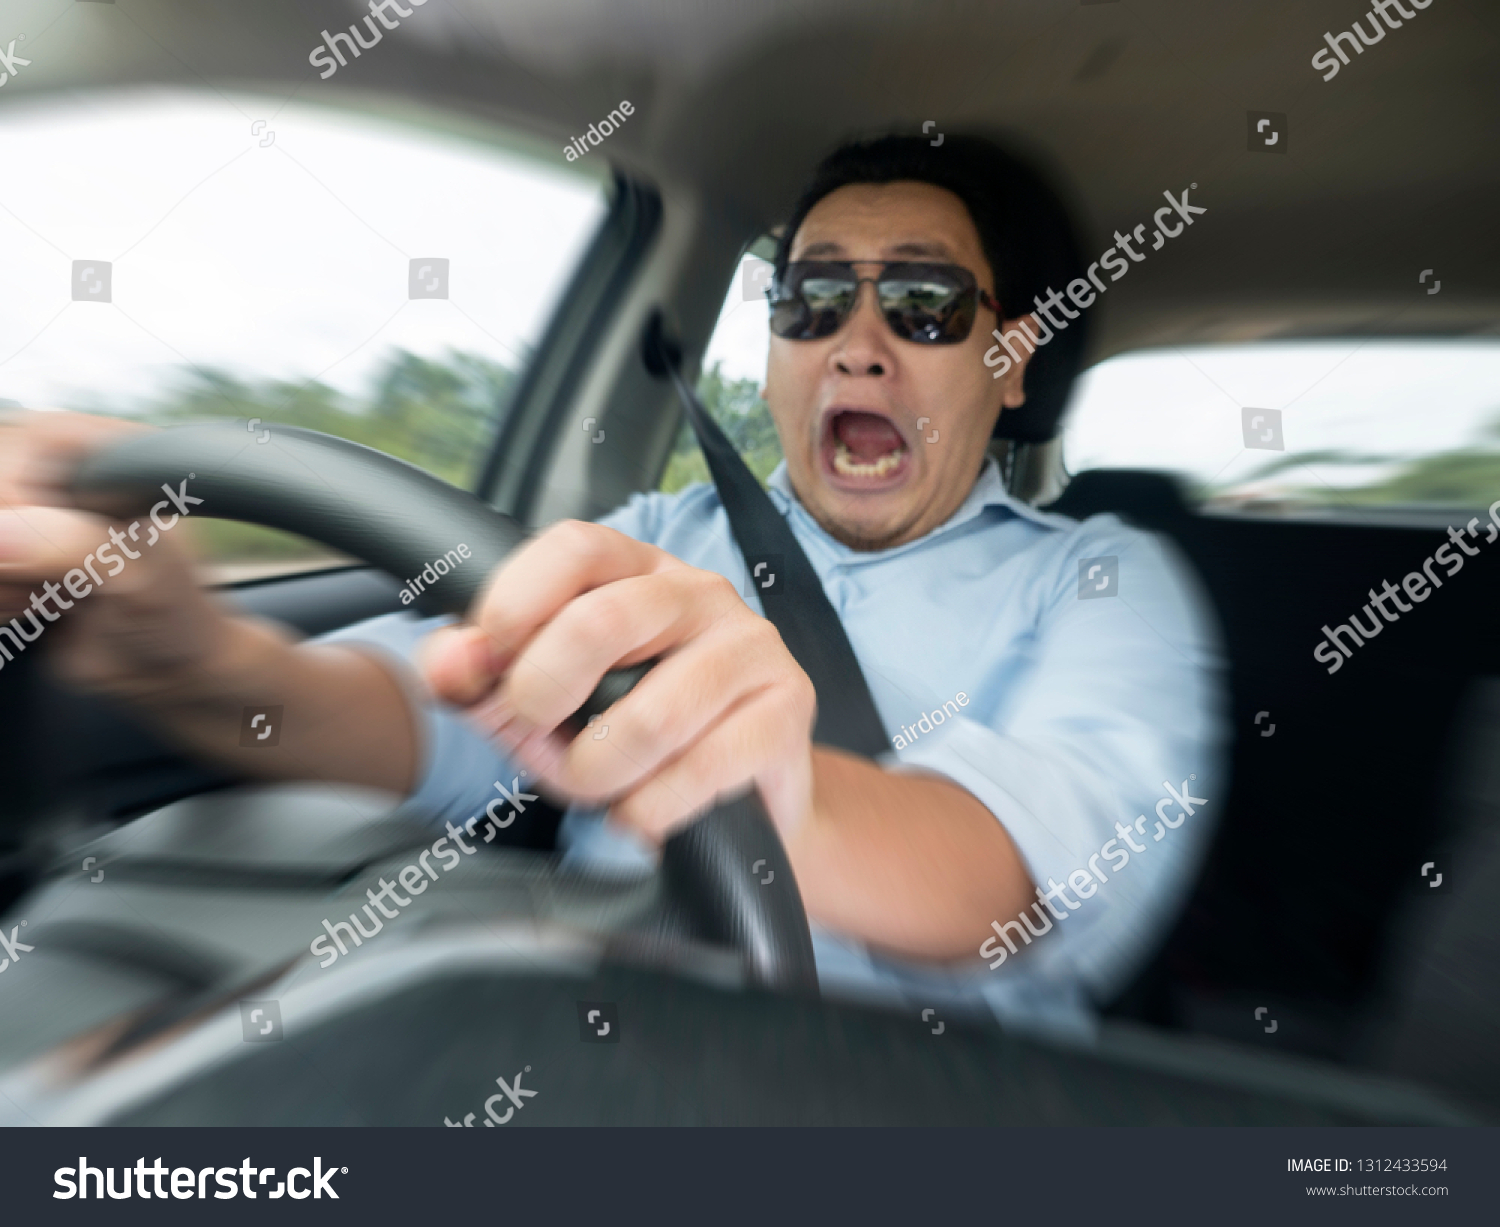 https://image.shutterstock.com/z/stock-photo-portrait-of-male-asian-driver-shocked-and-panic-about-to-have-crash-accident-zoomed-motion-blur-1312433594.jpg